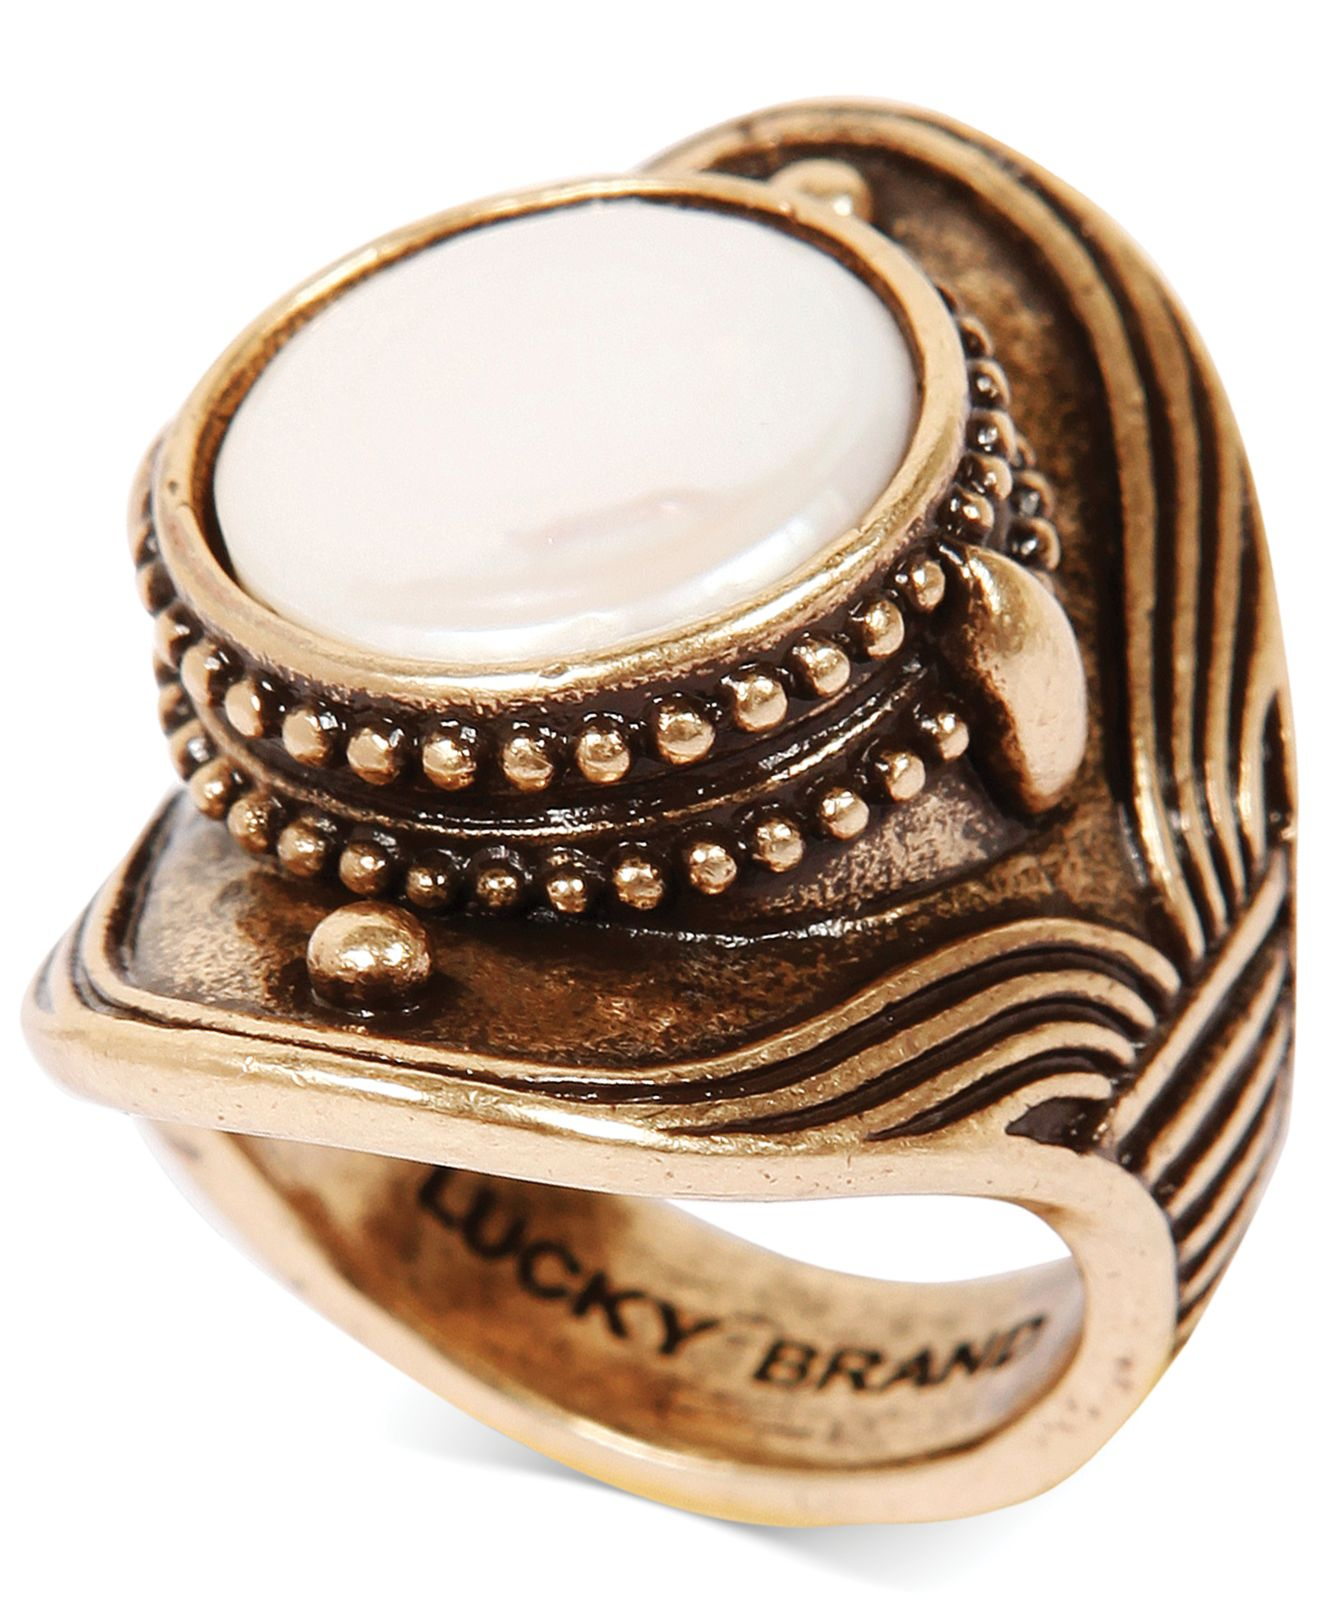 Lyst Lucky brand Goldtone Freshwater Pearl Statement Ring (12mm) in